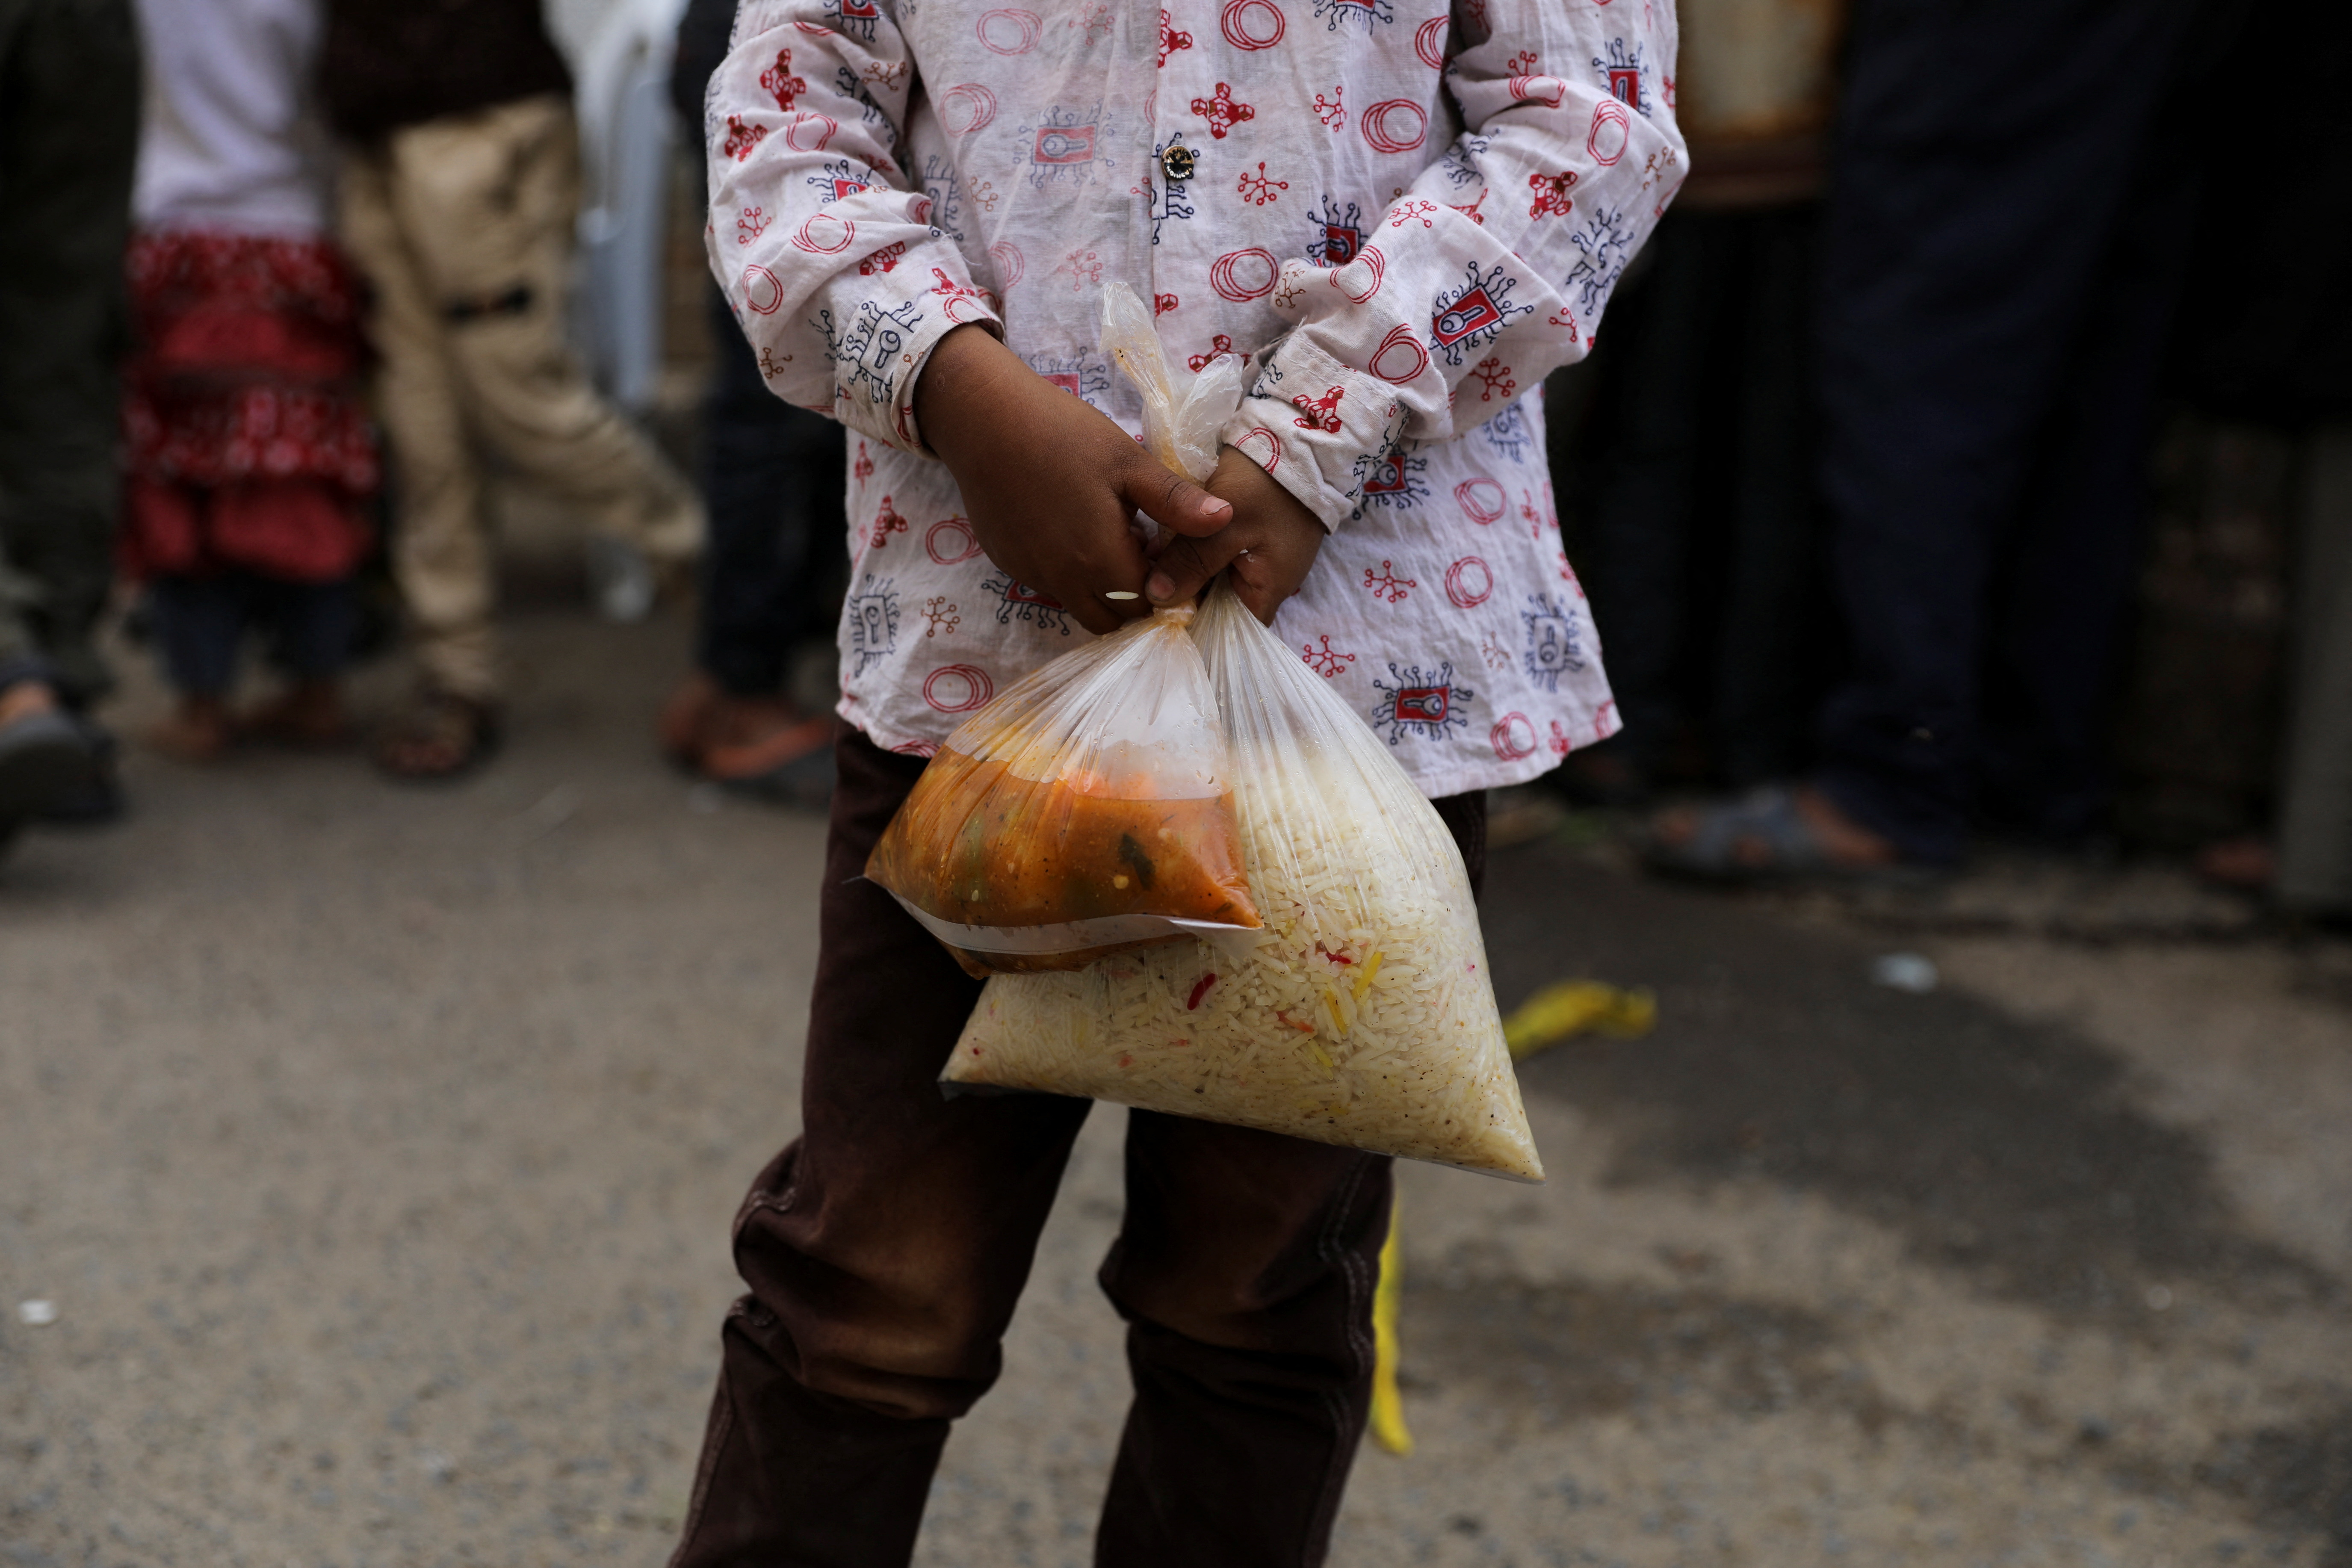 Boy holds a meal received from a charity kitchen during the holy month of Ramadan in Sanaa